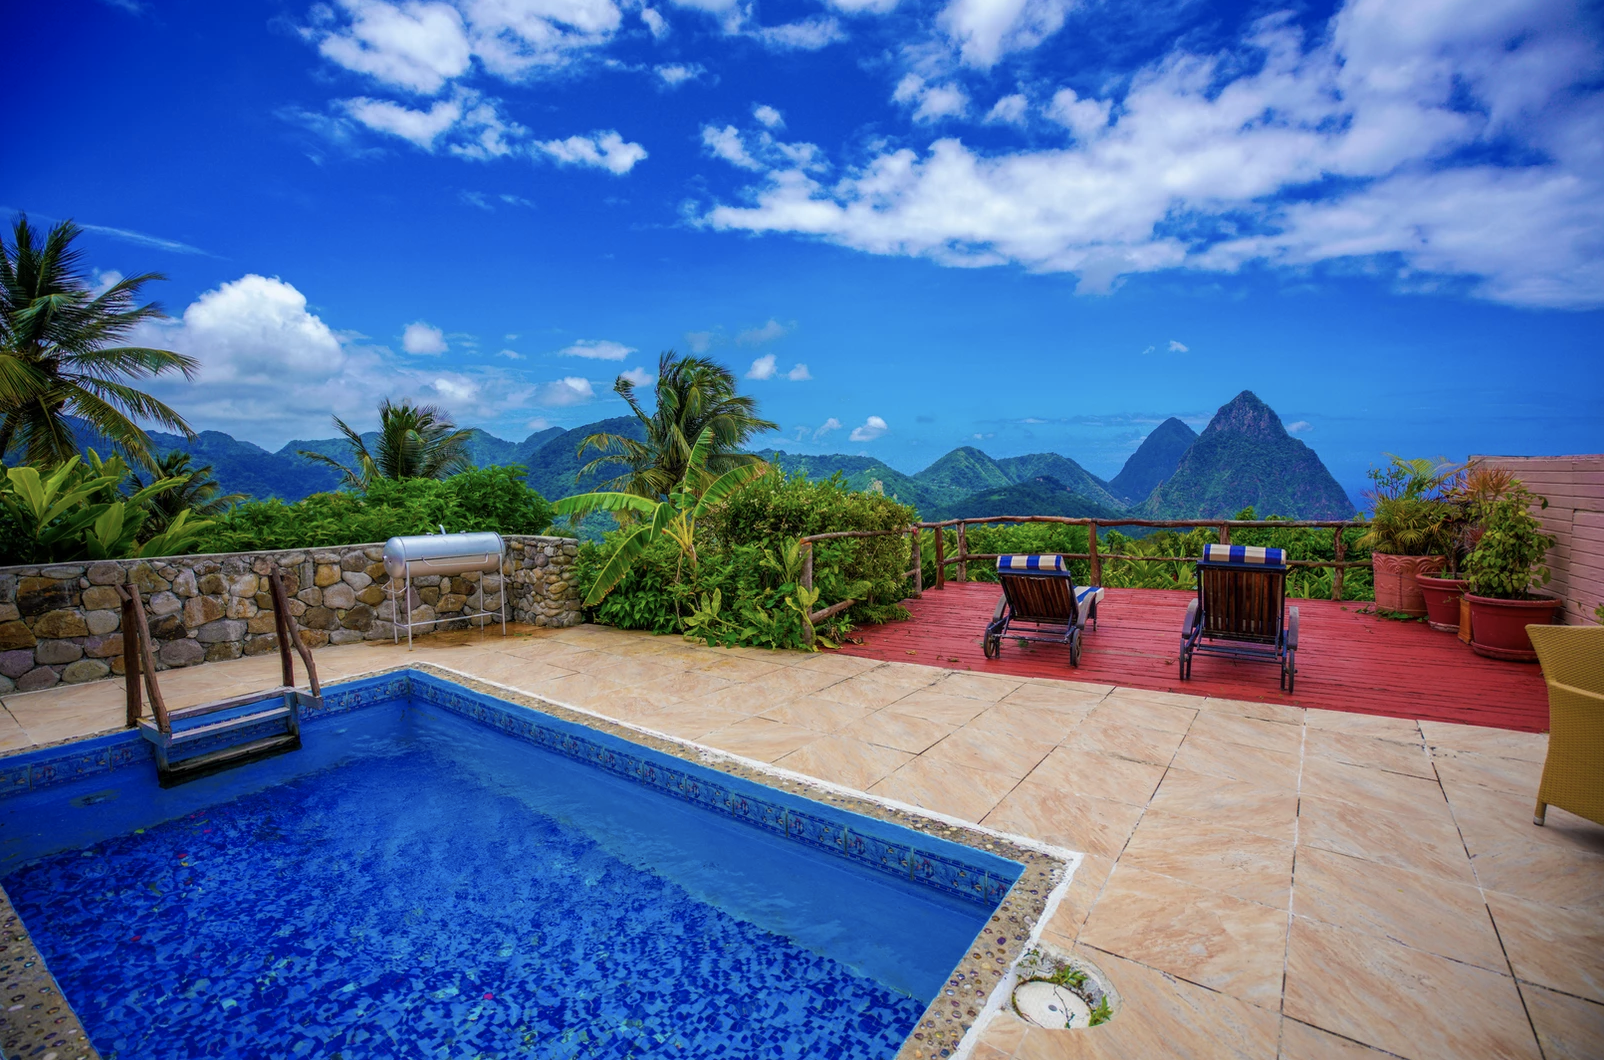 A private patio at the hotel with a plunge pool and a beautiful high-up view of mountains in the distance